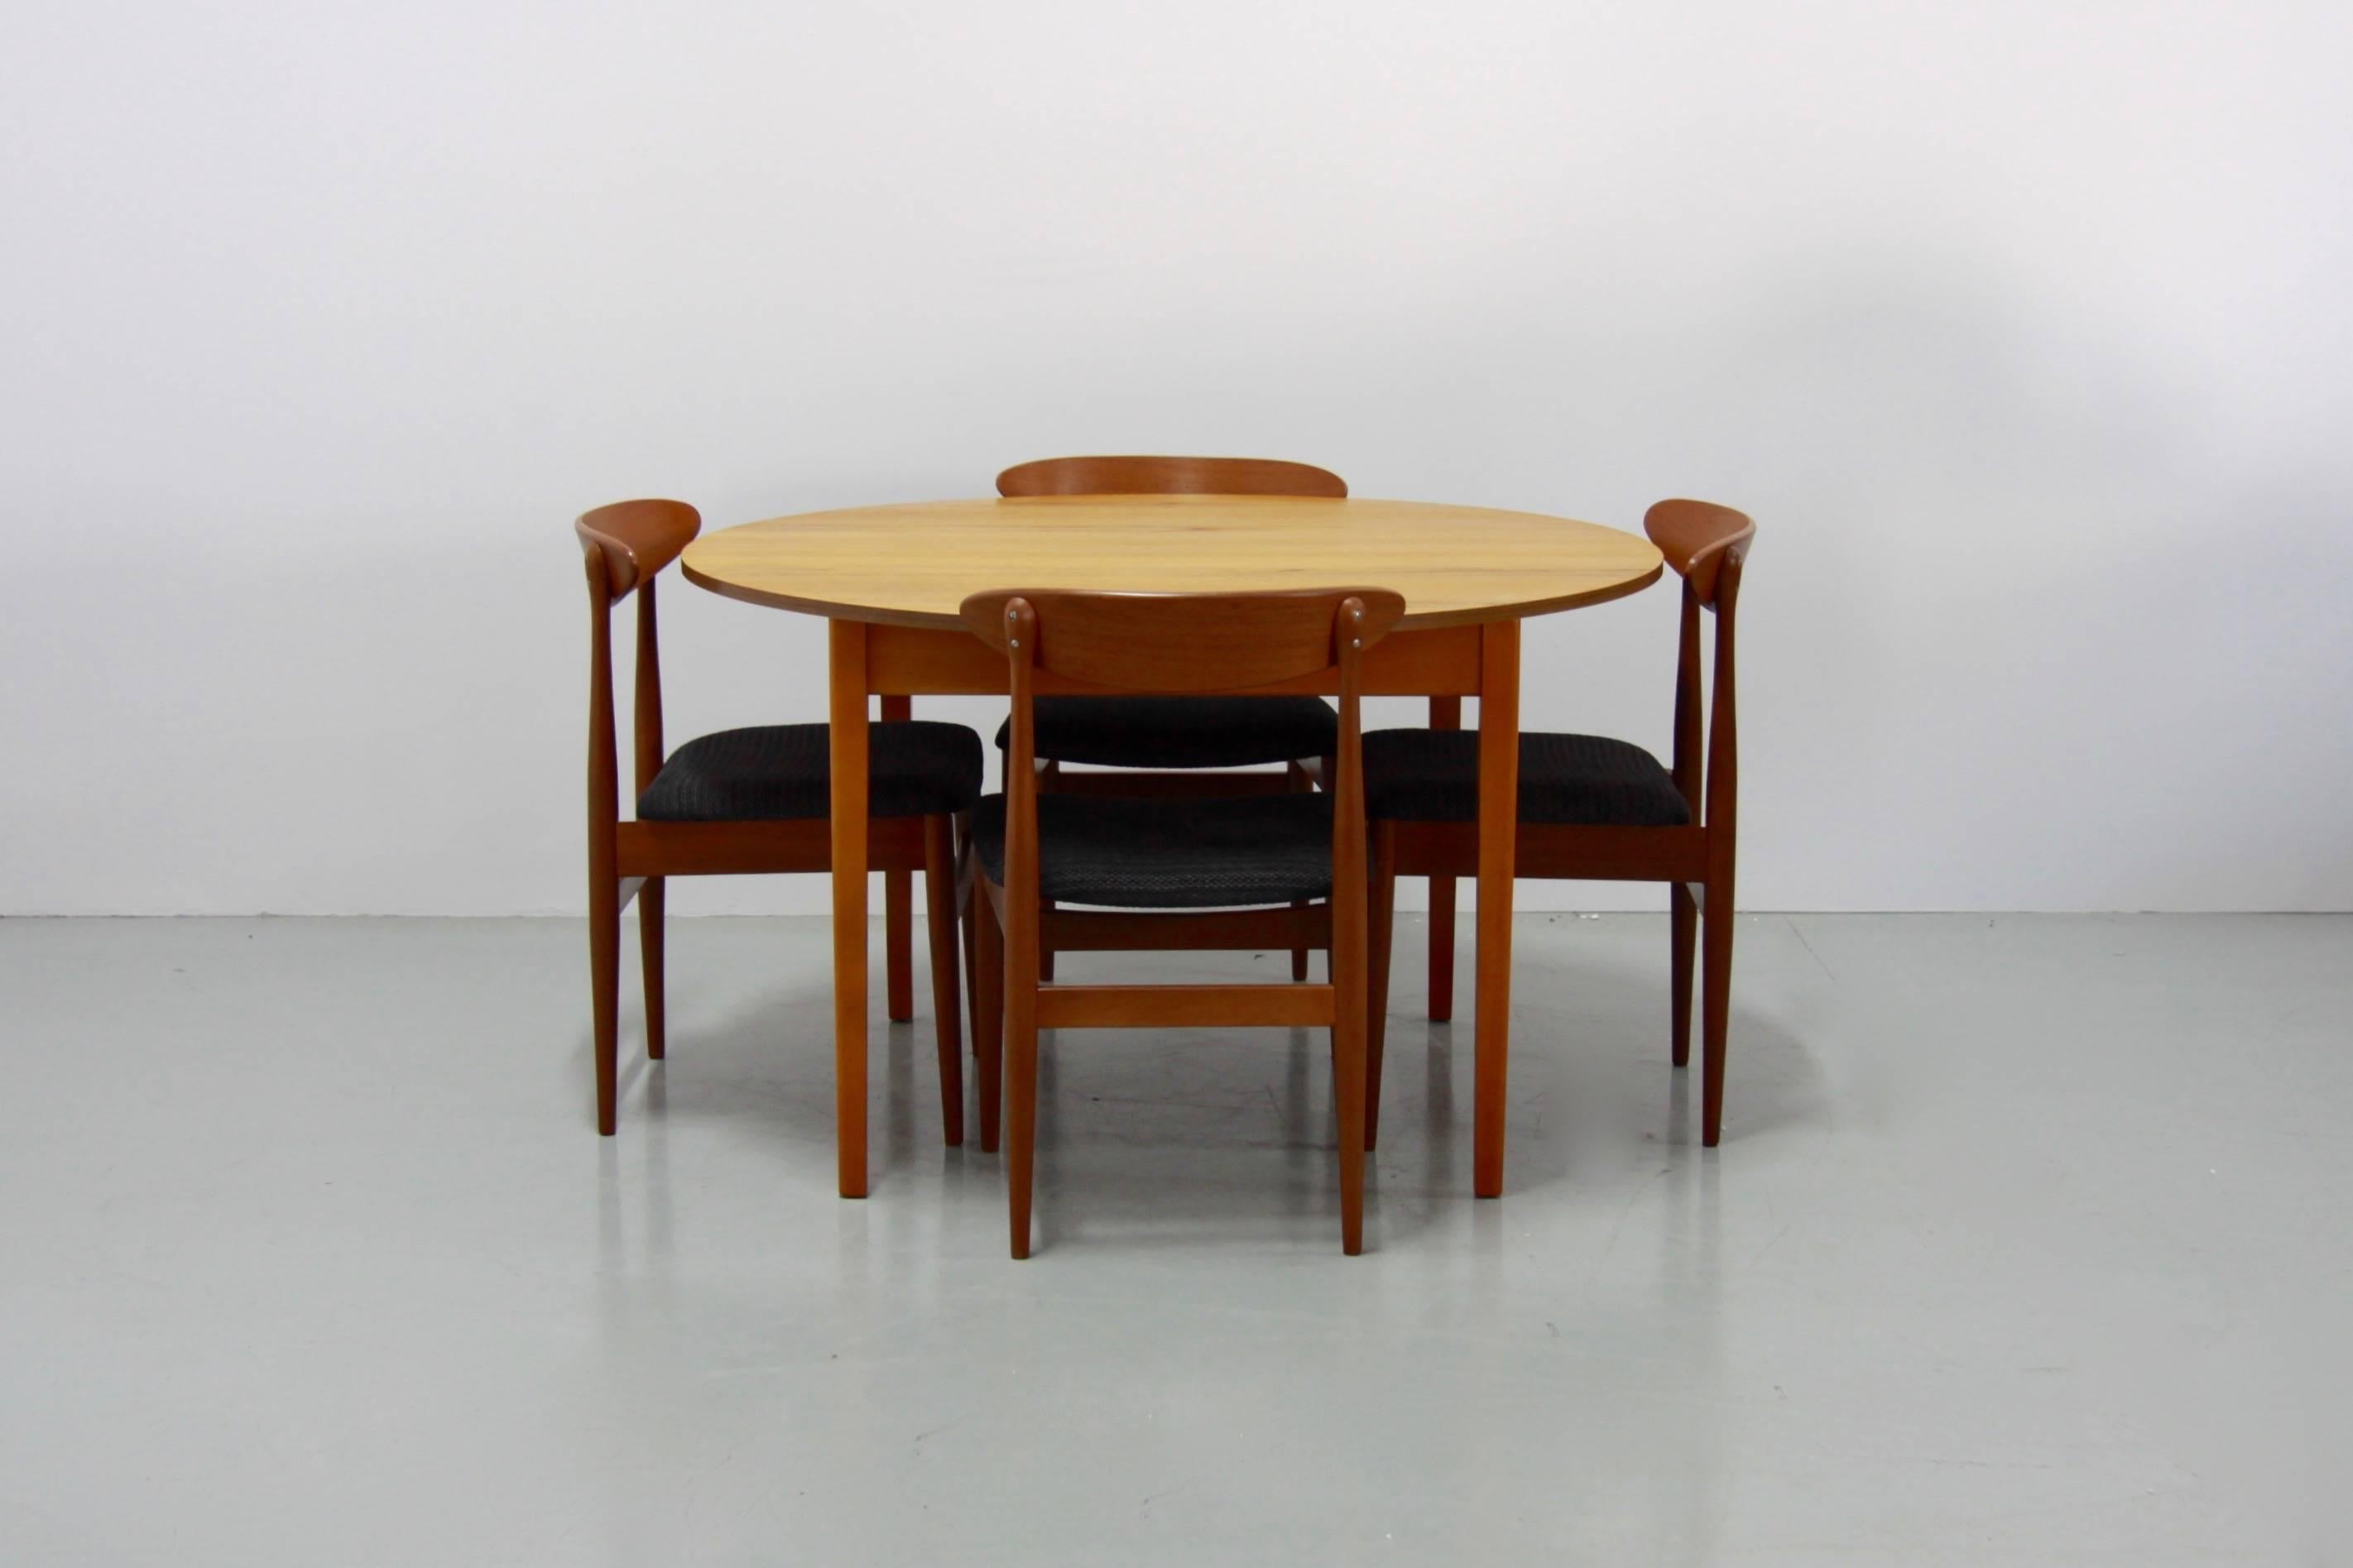 This Classic round teak dining table with a pull-out extension plate was produced in the 1960s. The tabletop divides and increases the table surface up to 171 cm in length. The table was made in Denmark.
The chairs shown on the photos are not